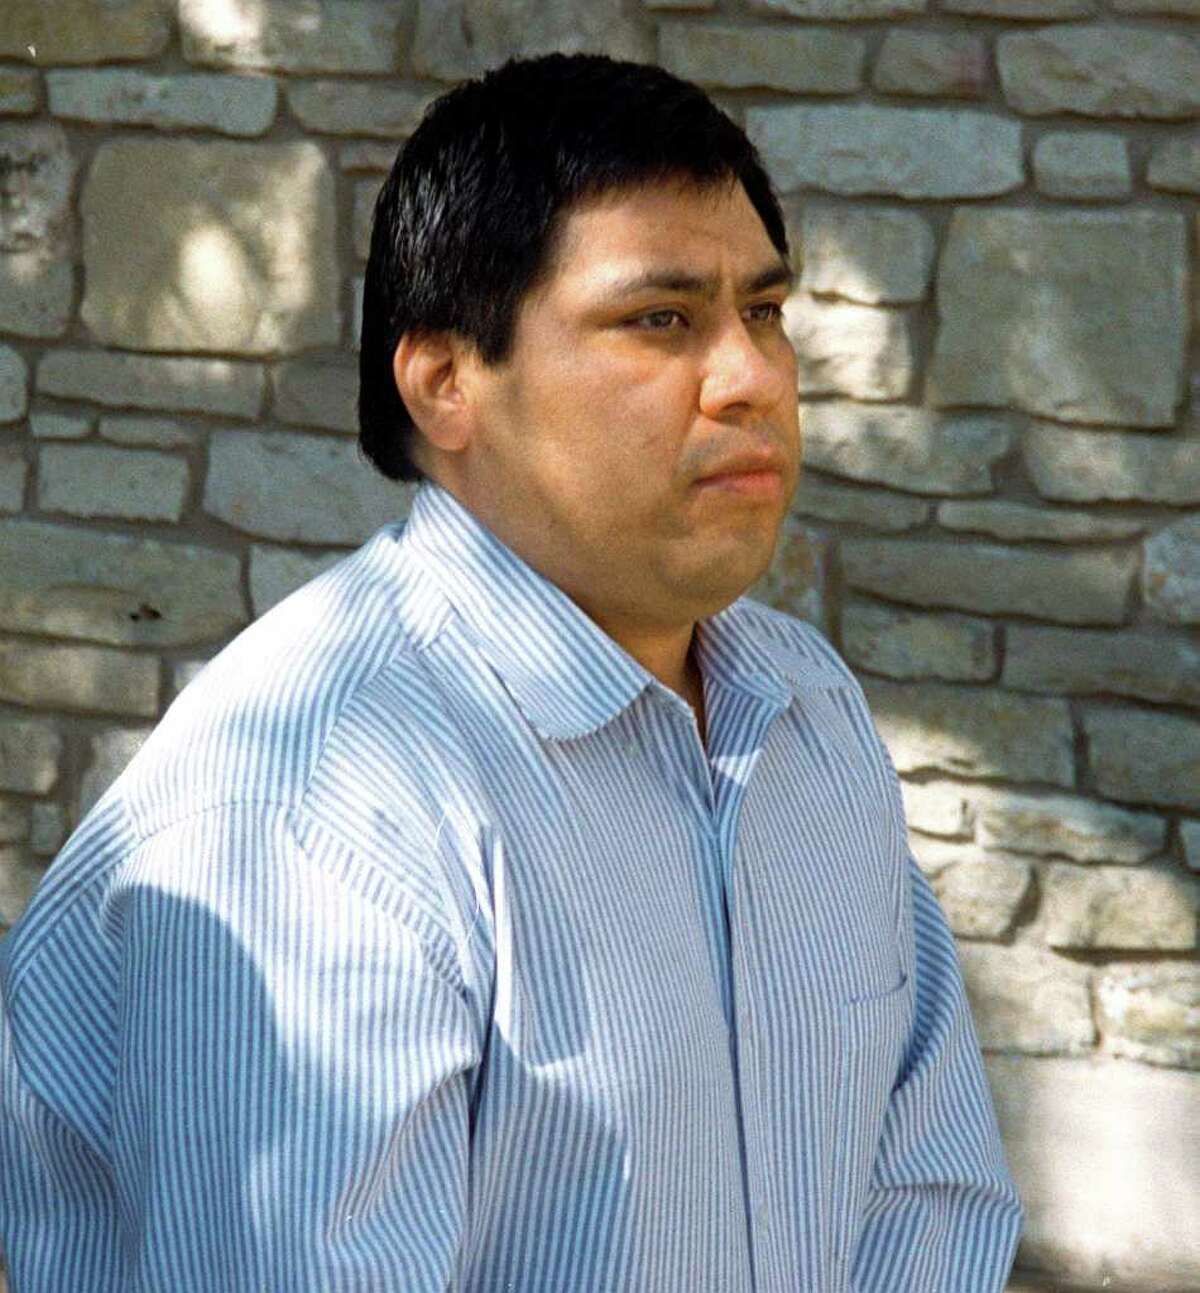 Ramiro Hernandez-Llanas was convicted in the 1997 slaying of a rancher from Kerrville.